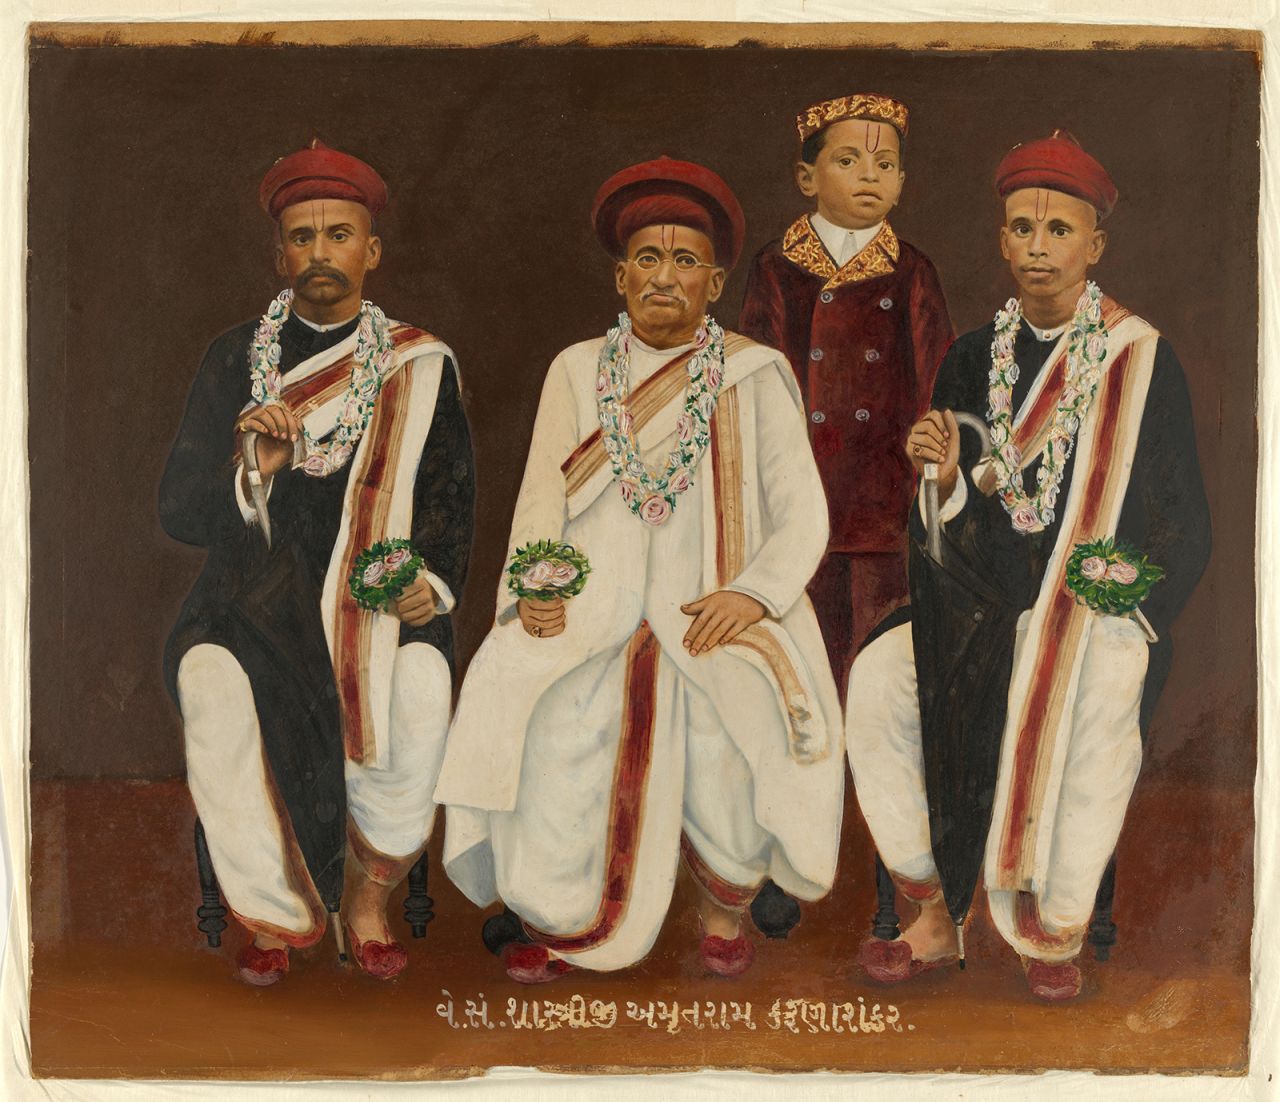 An untitled Gujarati family portrait is among the 14 items set to be returned.